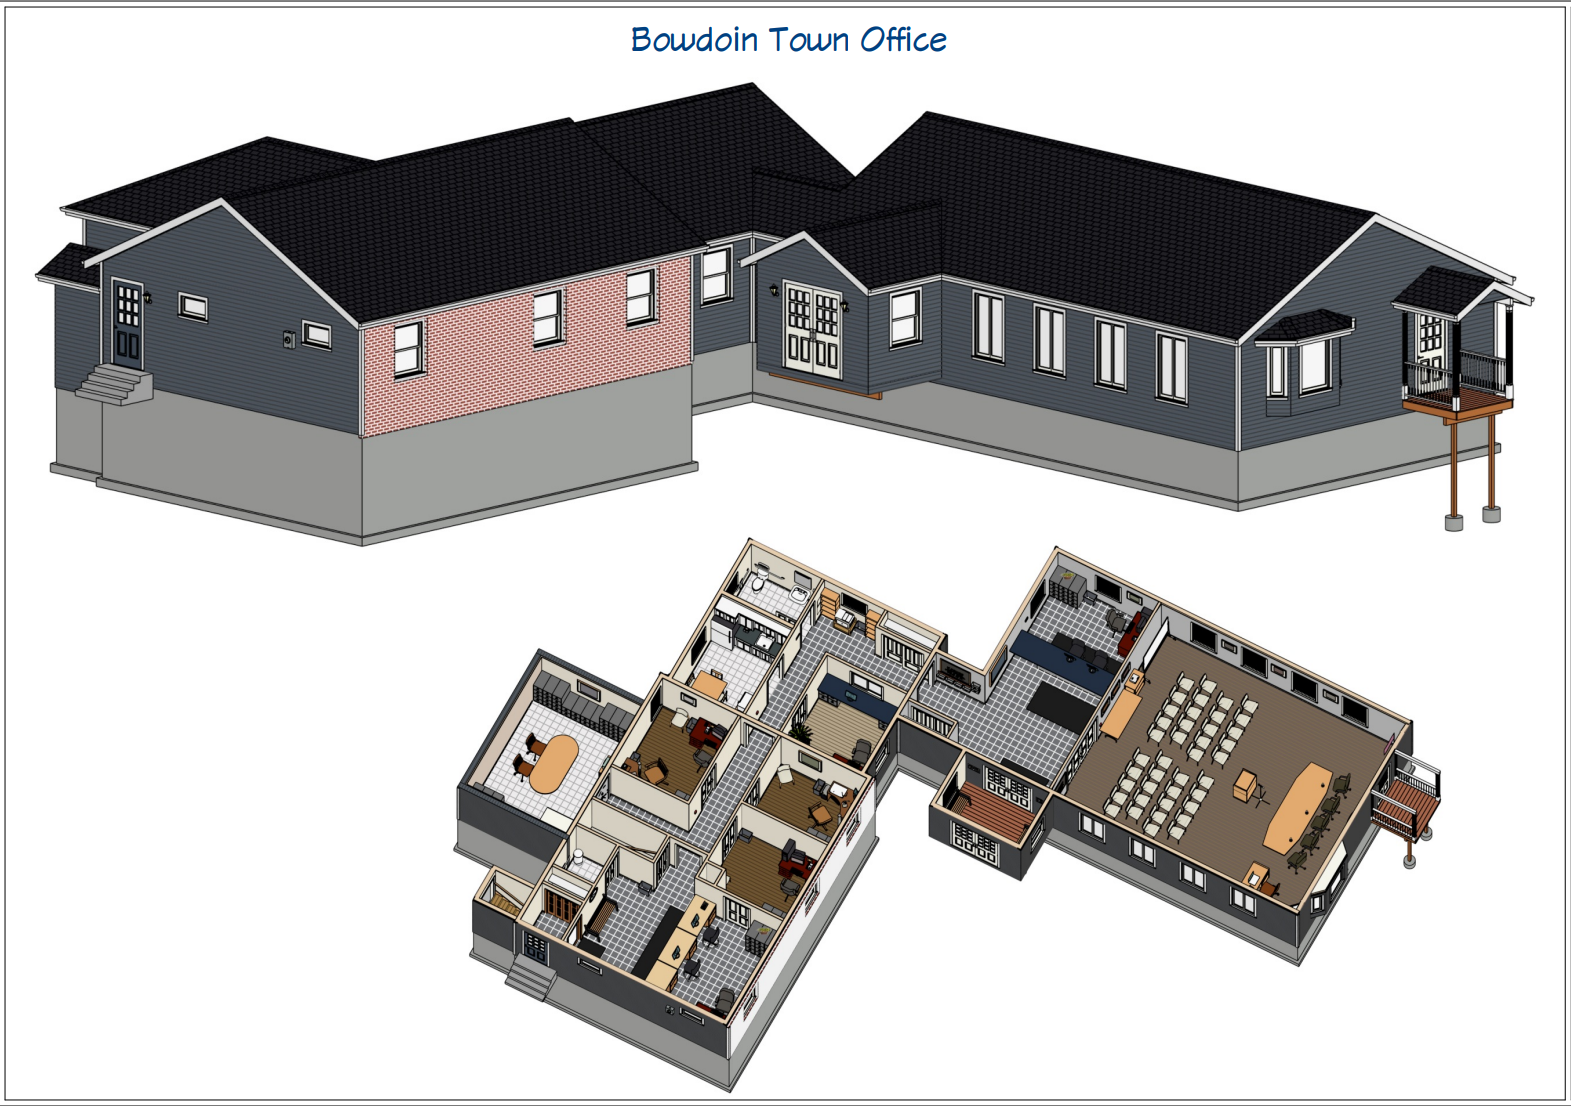 Bowdoin Town Office Expansion Project